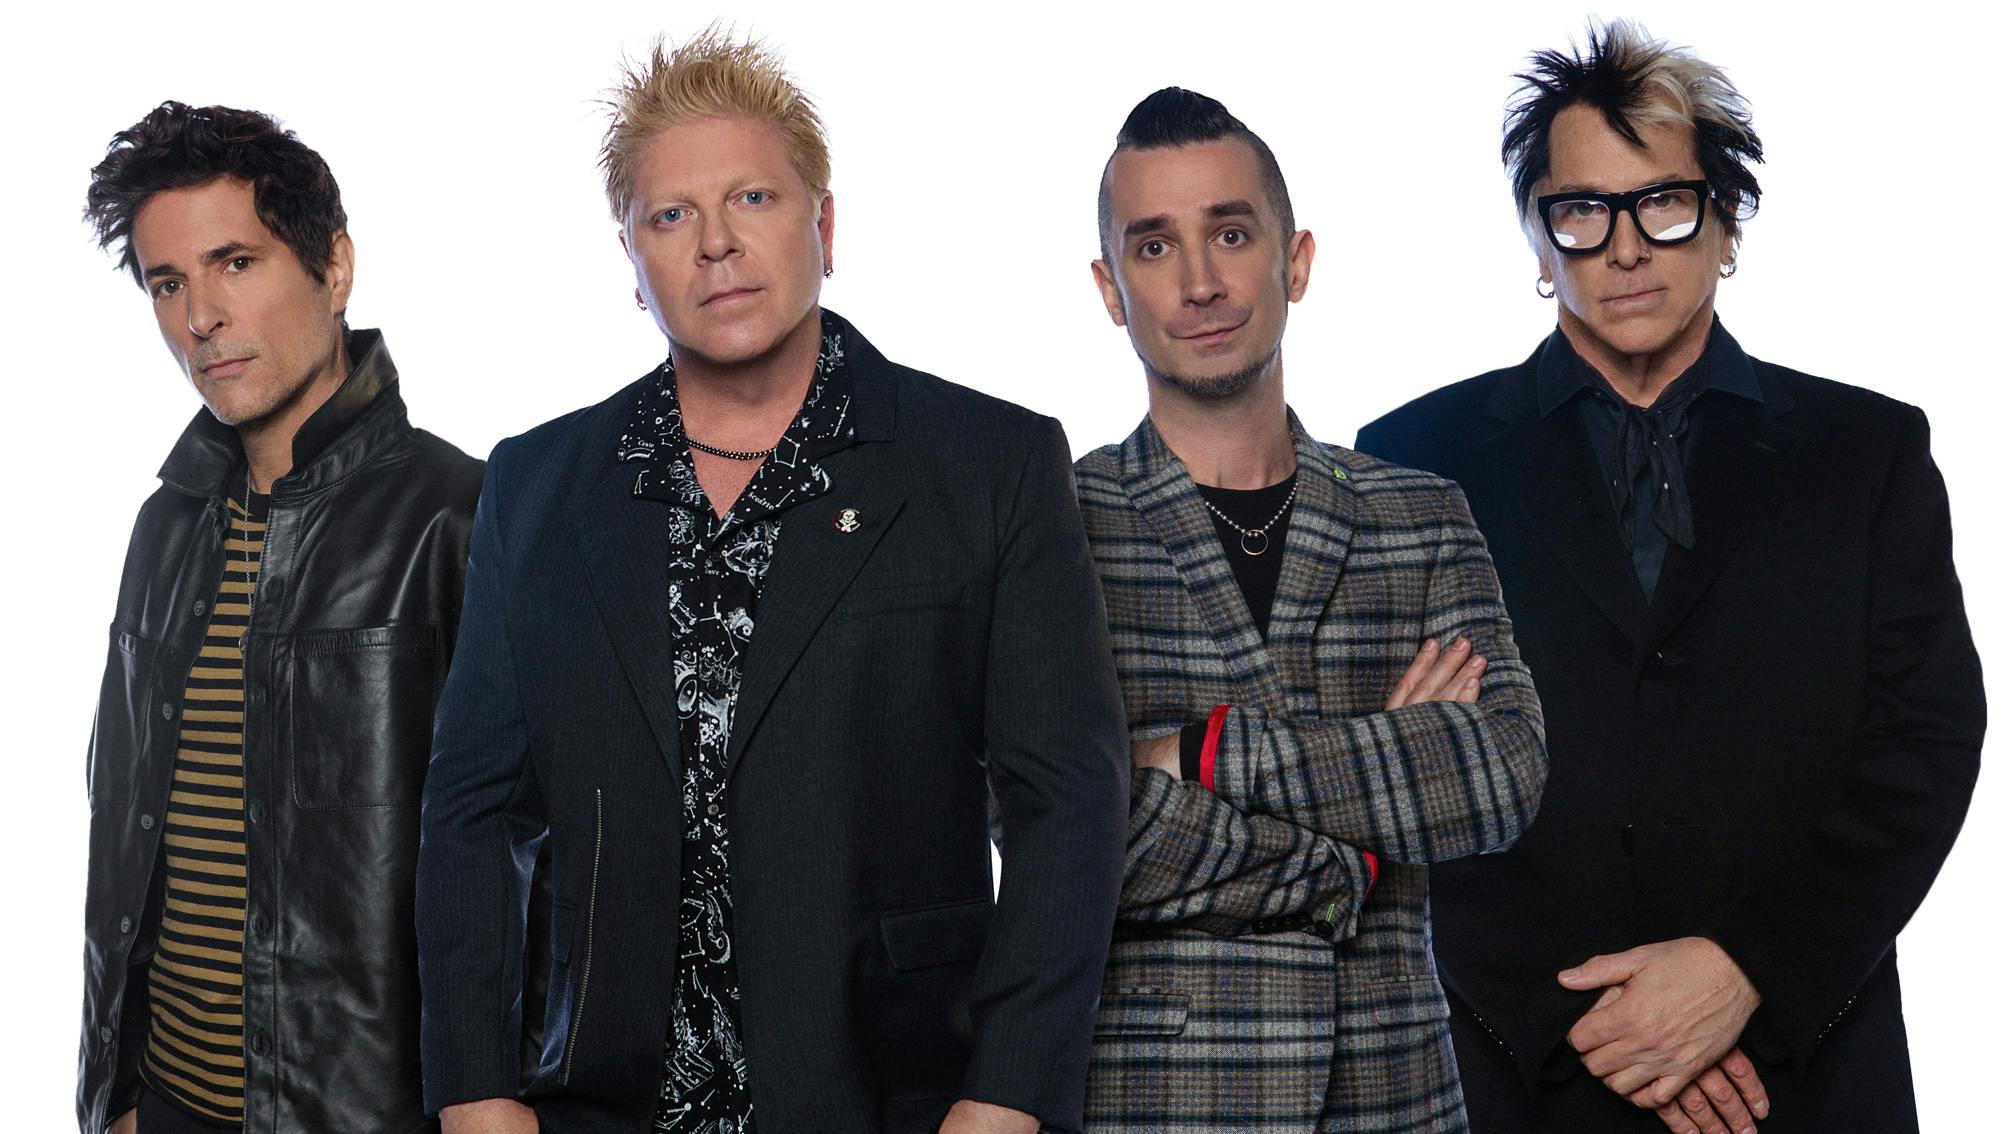 Drummer Pete Parada dropped from The Offspring for not getting COVID-19 vaccine